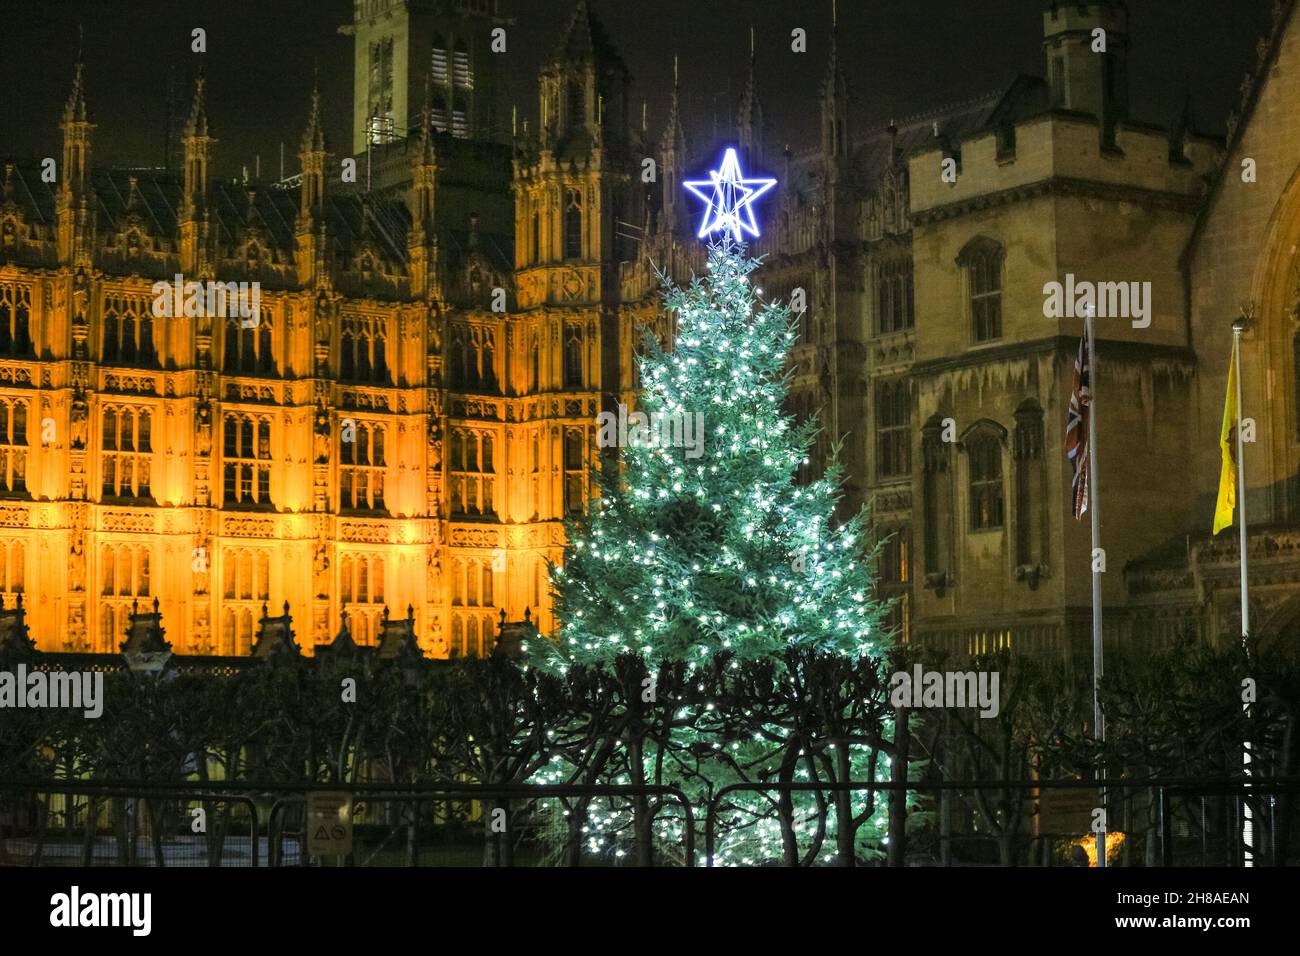 London, UK. 28th Nov, 2021. A tall Sitka spruce Christmas tree has been put up and illuminated in New Palace Yard, outside the Houses of Parliament in Westminster, as is the tradition every year, marking the beginning of the festive season at the Palace of Westminster. Credit: Imageplotter/Alamy Live News Stock Photo